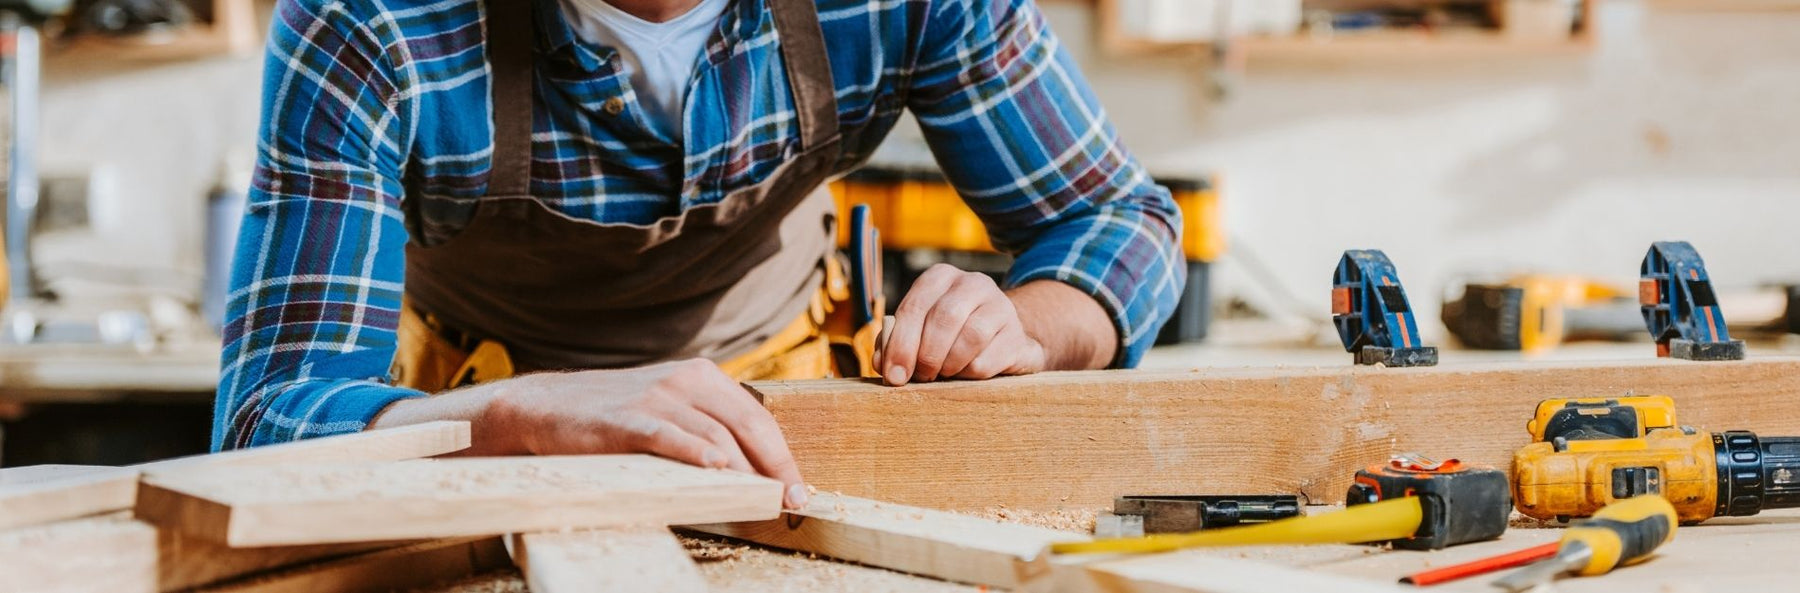 Easy Starter Projects for Beginner Woodworkers